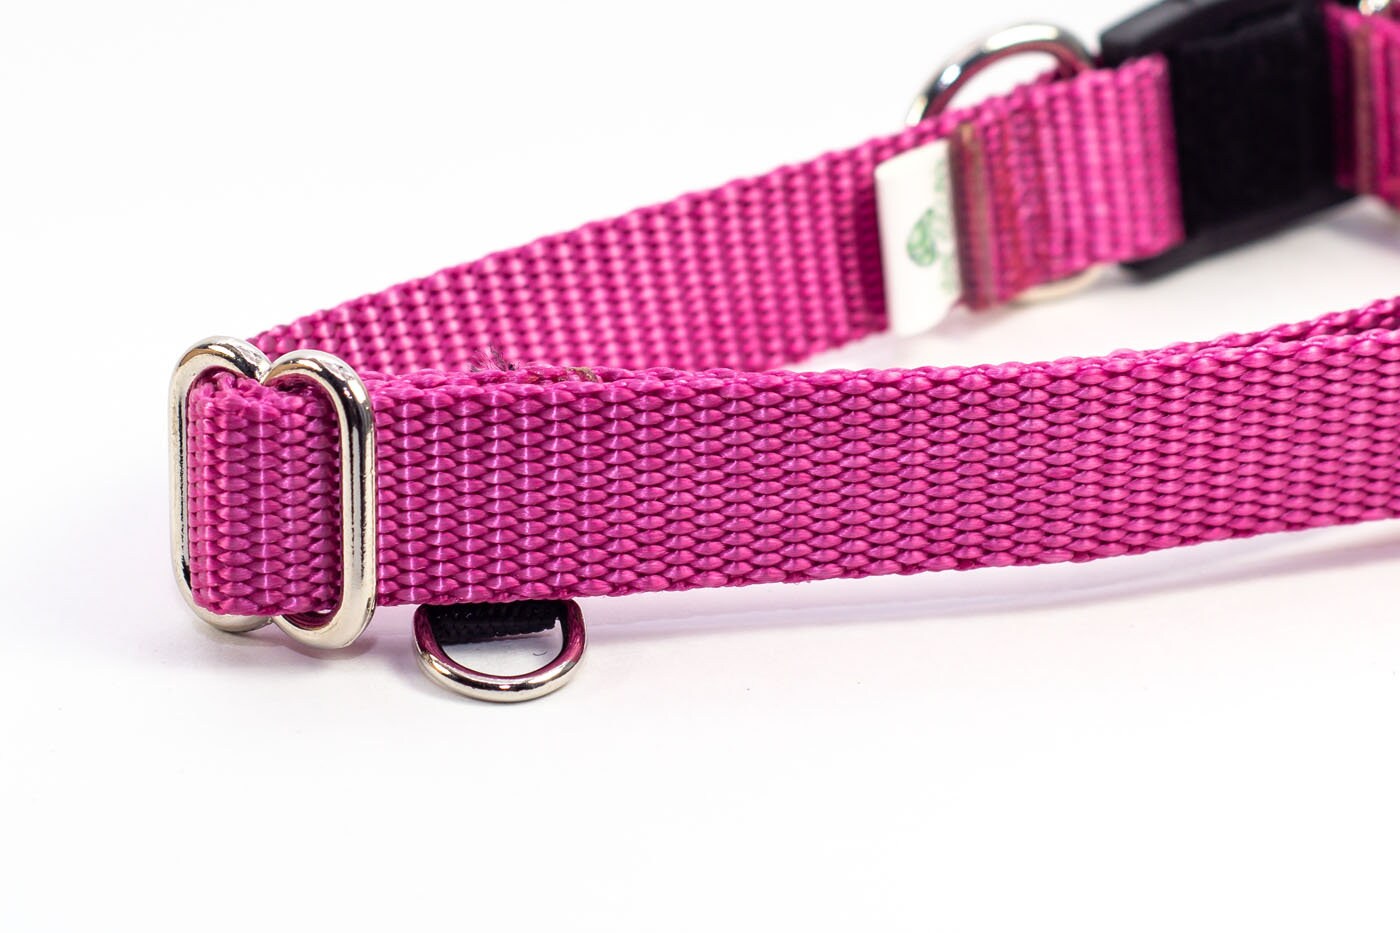 ADD-ON / UPGRADE Mini Tag Ring for Any Collar or Harness Purchase